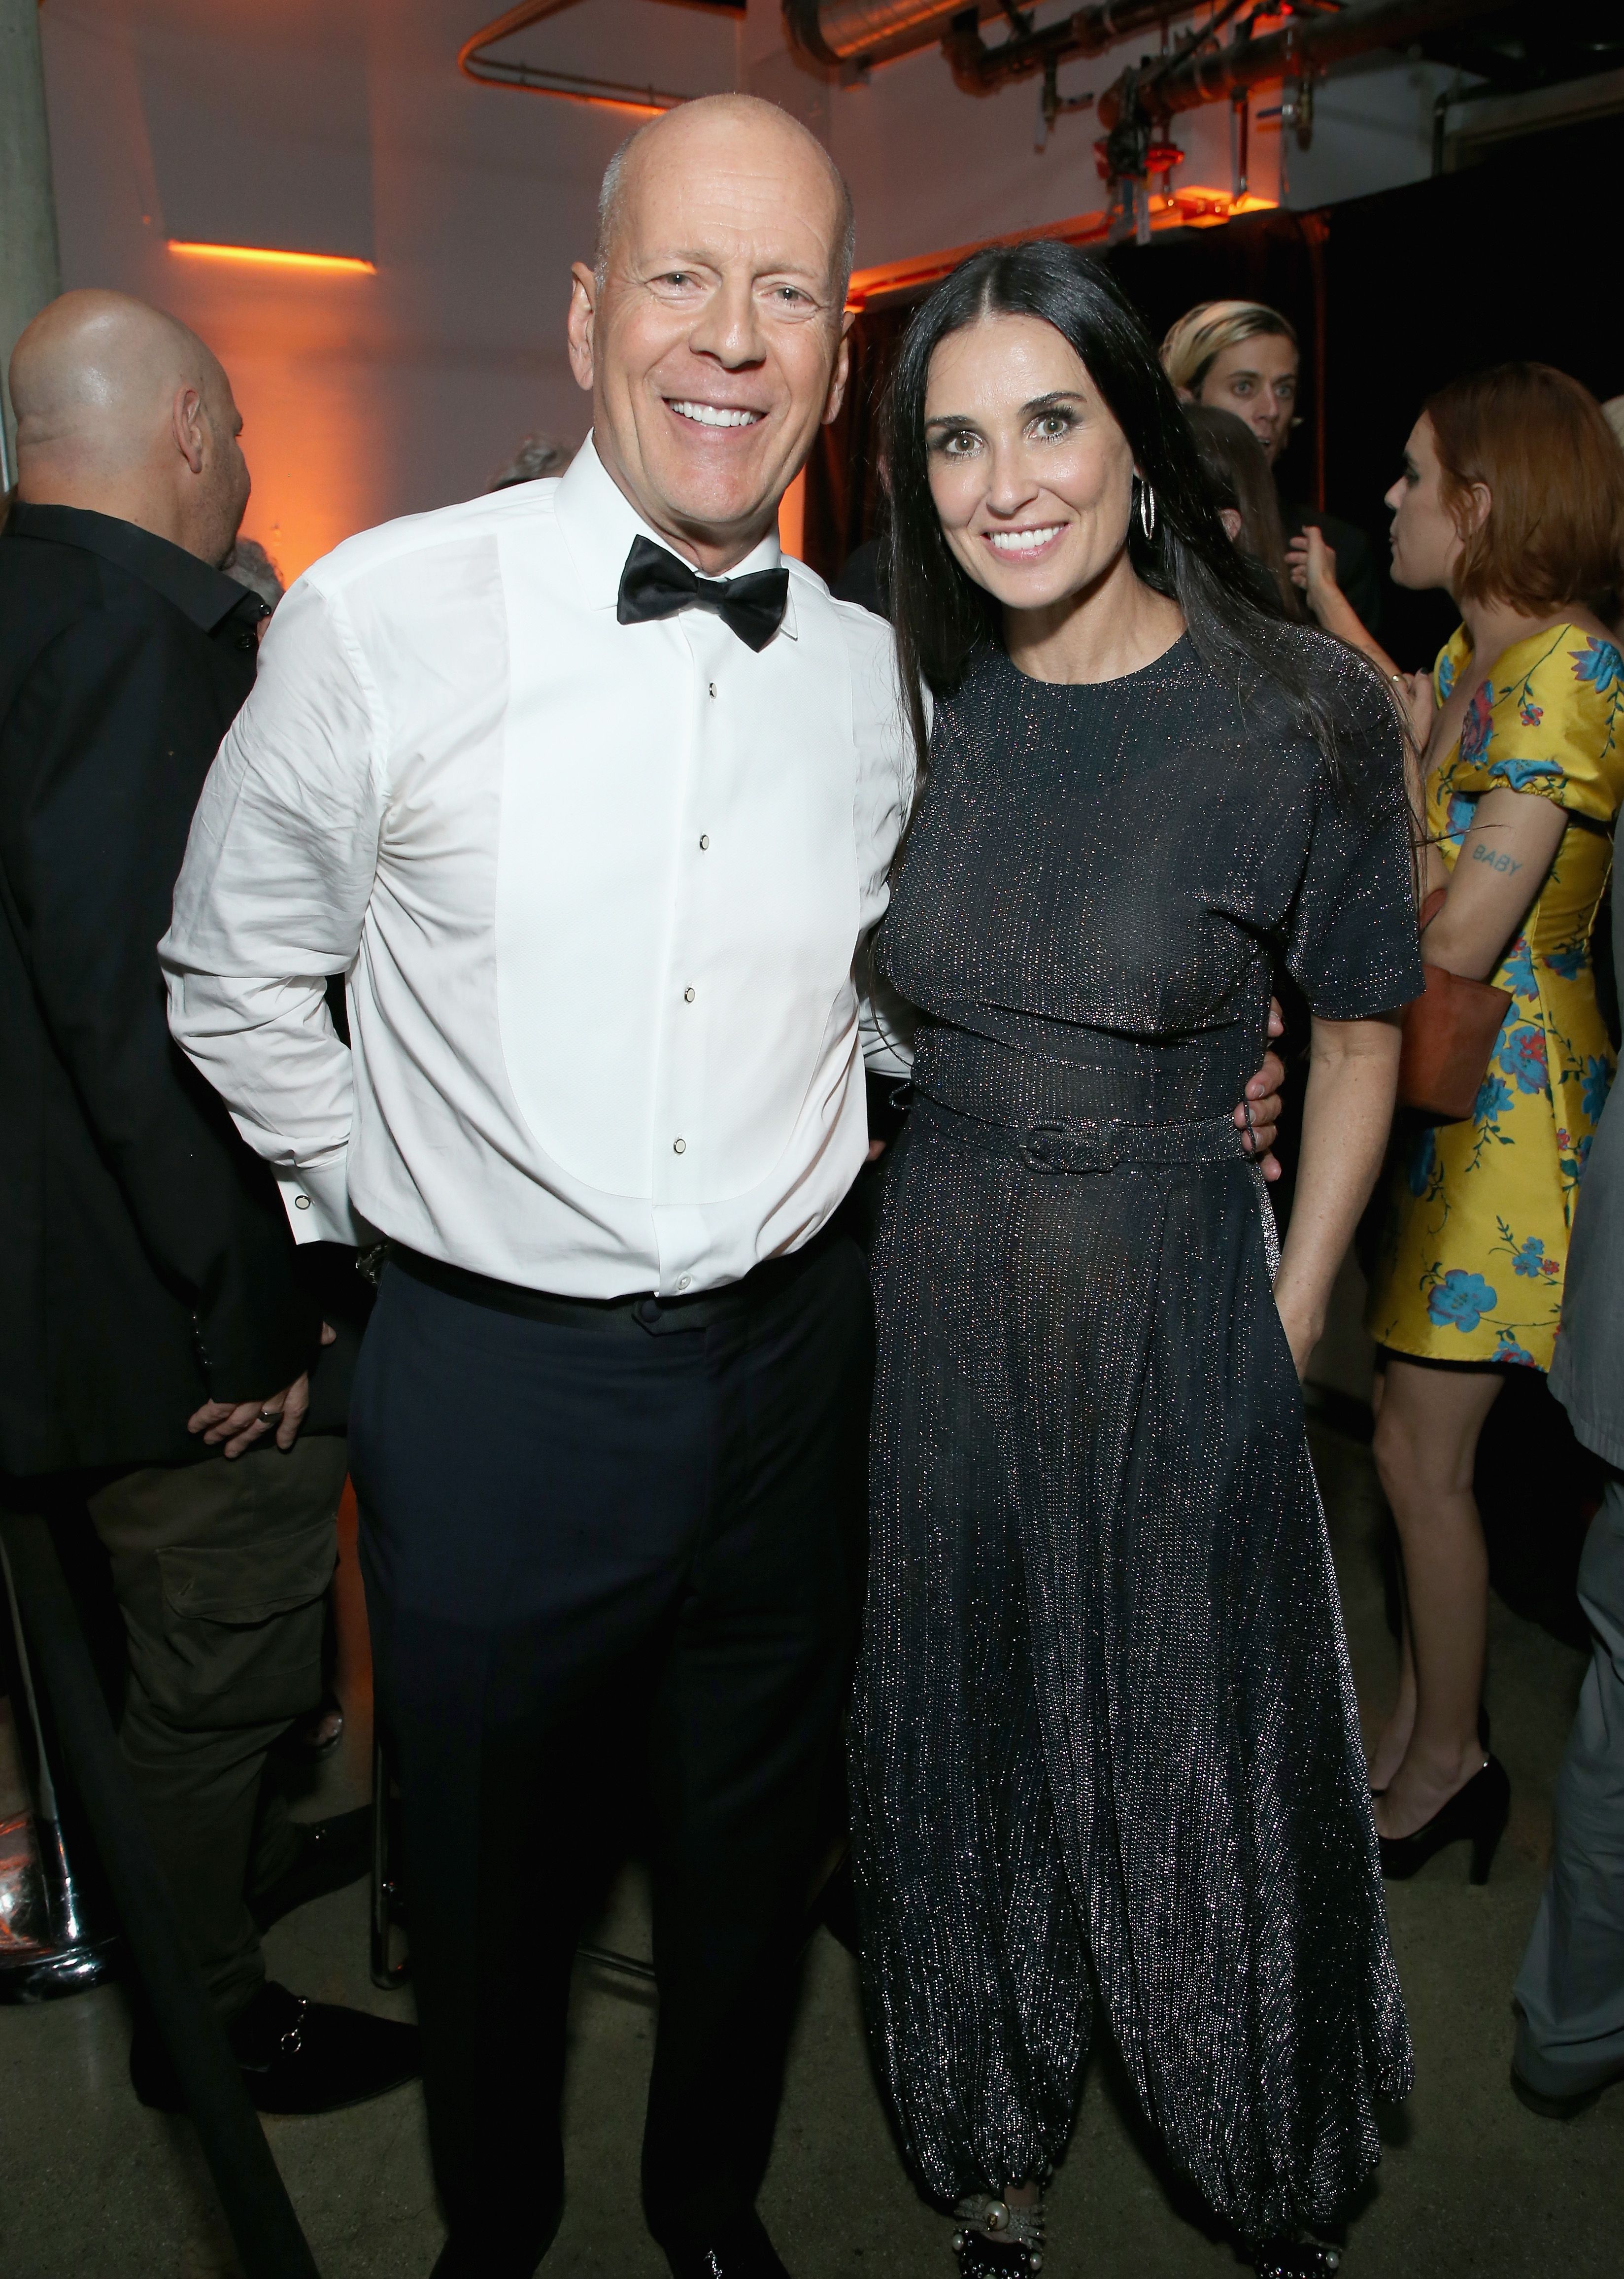 Bruce Willis and Demi Moore at the after party for the Comedy Central Roast of Bruce Willis at NeueHouse on July 14, 2018 | Photo: Getty Images